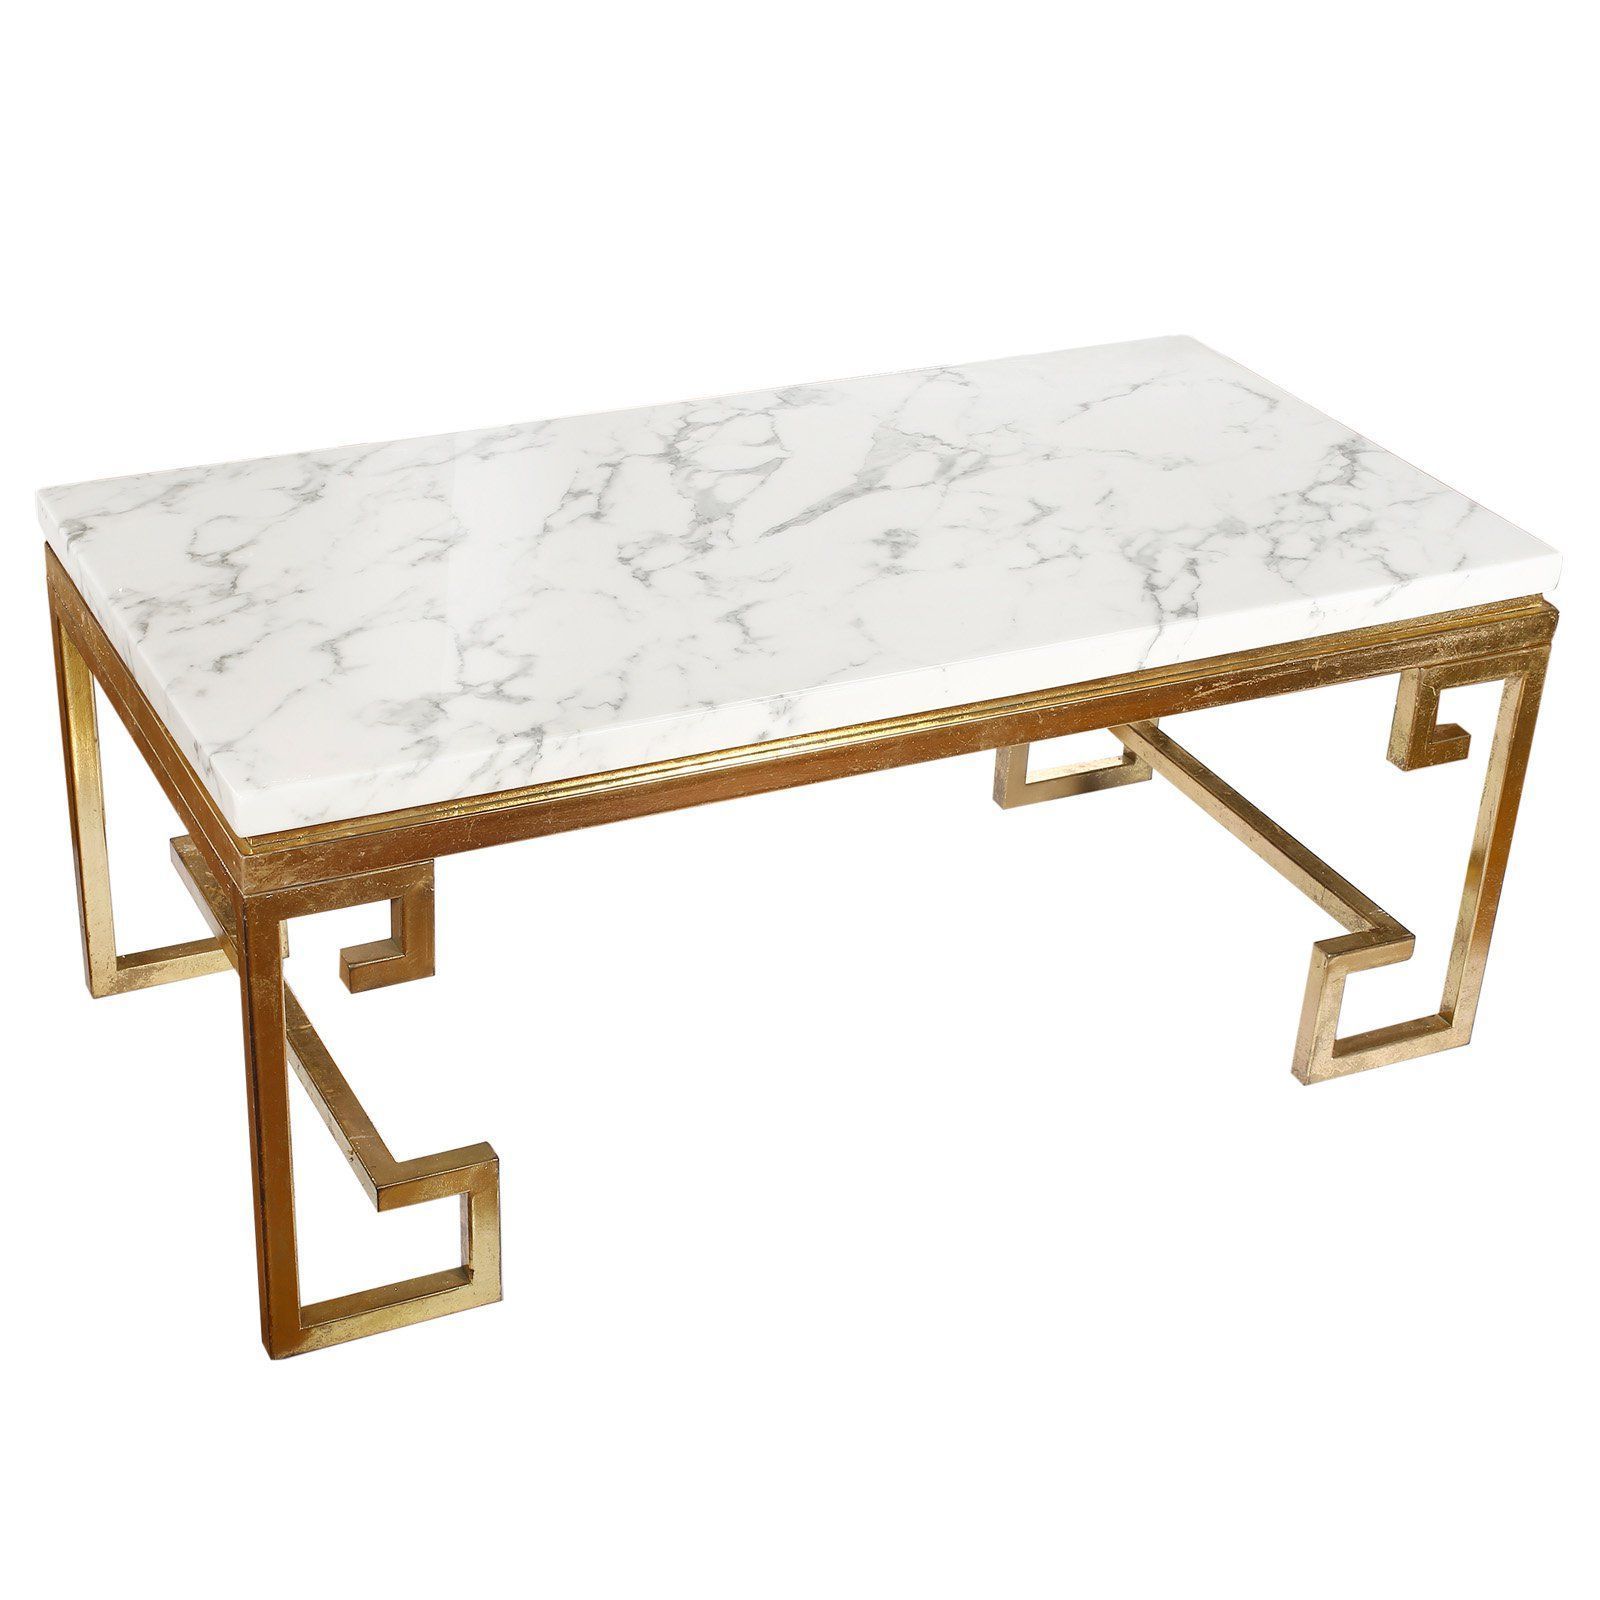 From Hayneedle With Regard To Fashionable Slab Large Marble Coffee Tables With Brass Base (View 18 of 20)